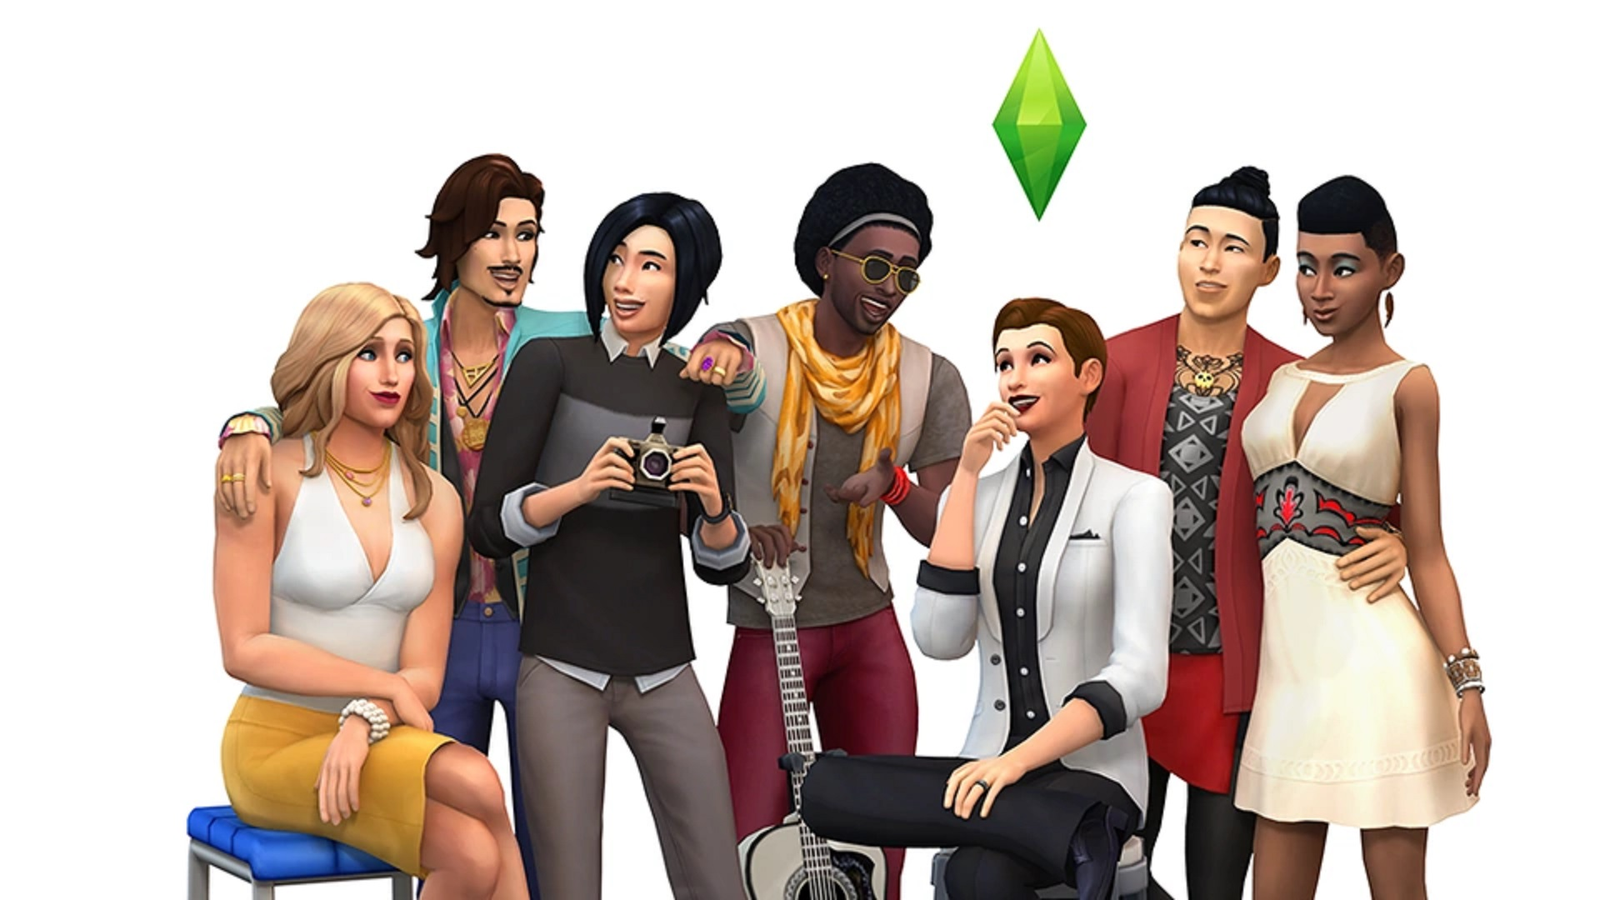 How to Make Sims Younger on Sims 3: 4 Steps (with Pictures)